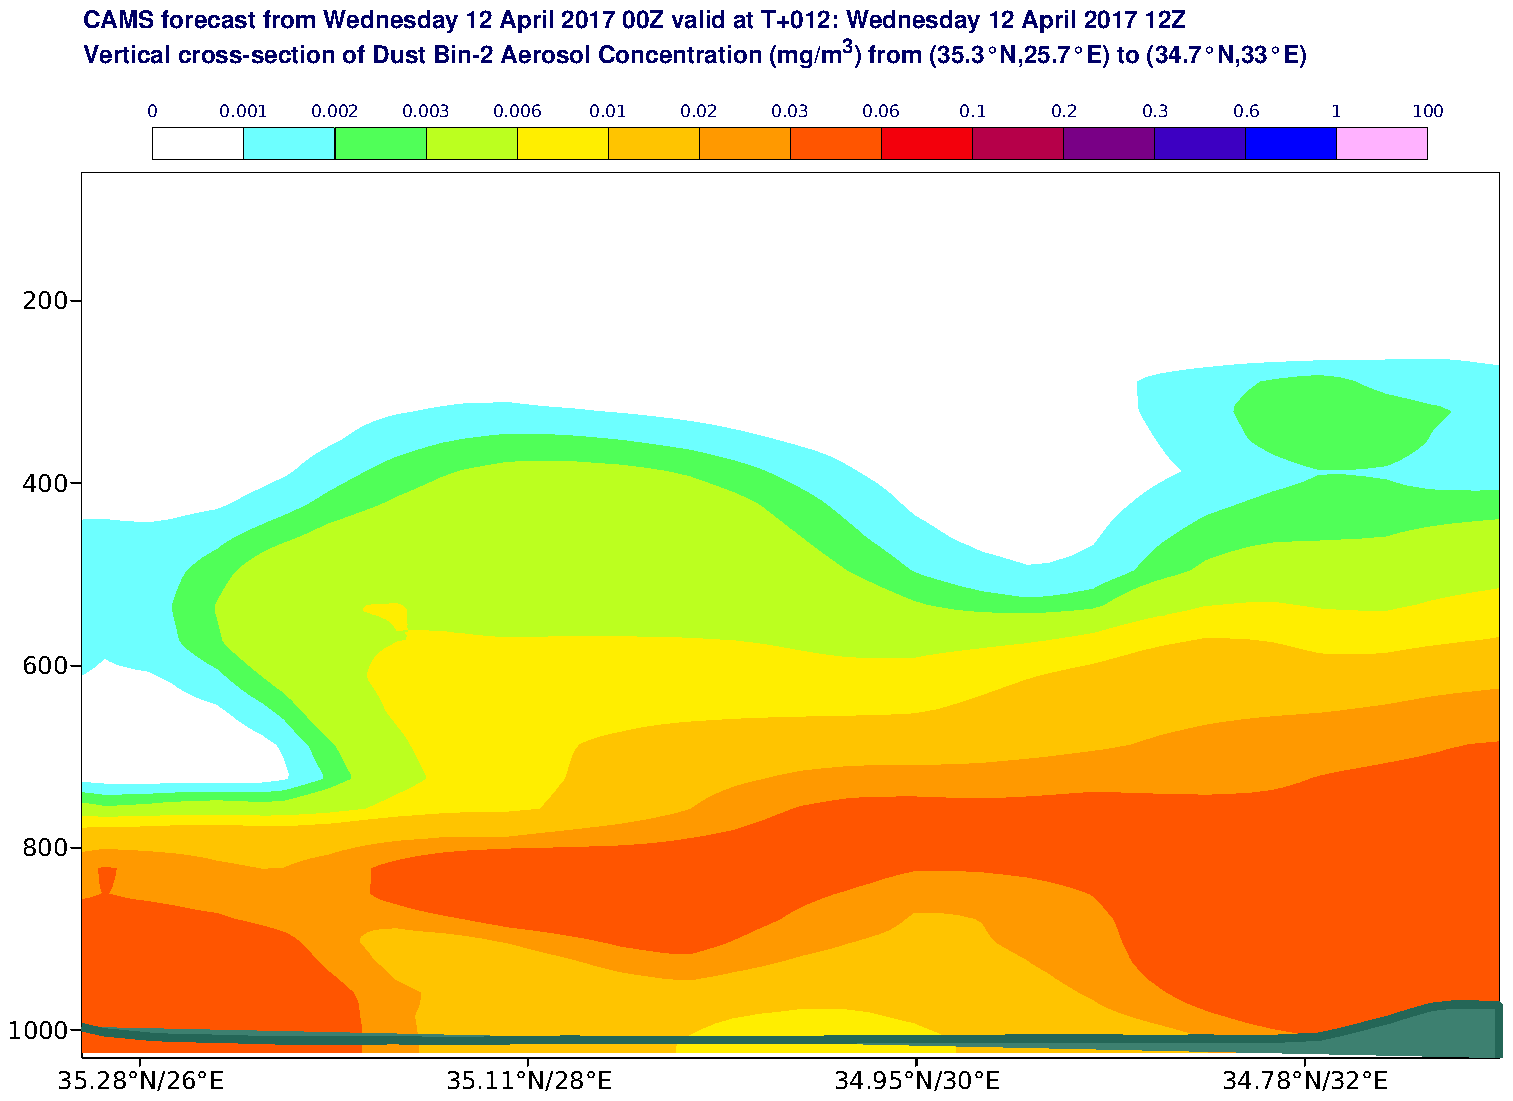 Vertical cross-section of Dust Bin-2 Aerosol Concentration (mg/m3) valid at T12 - 2017-04-12 12:00